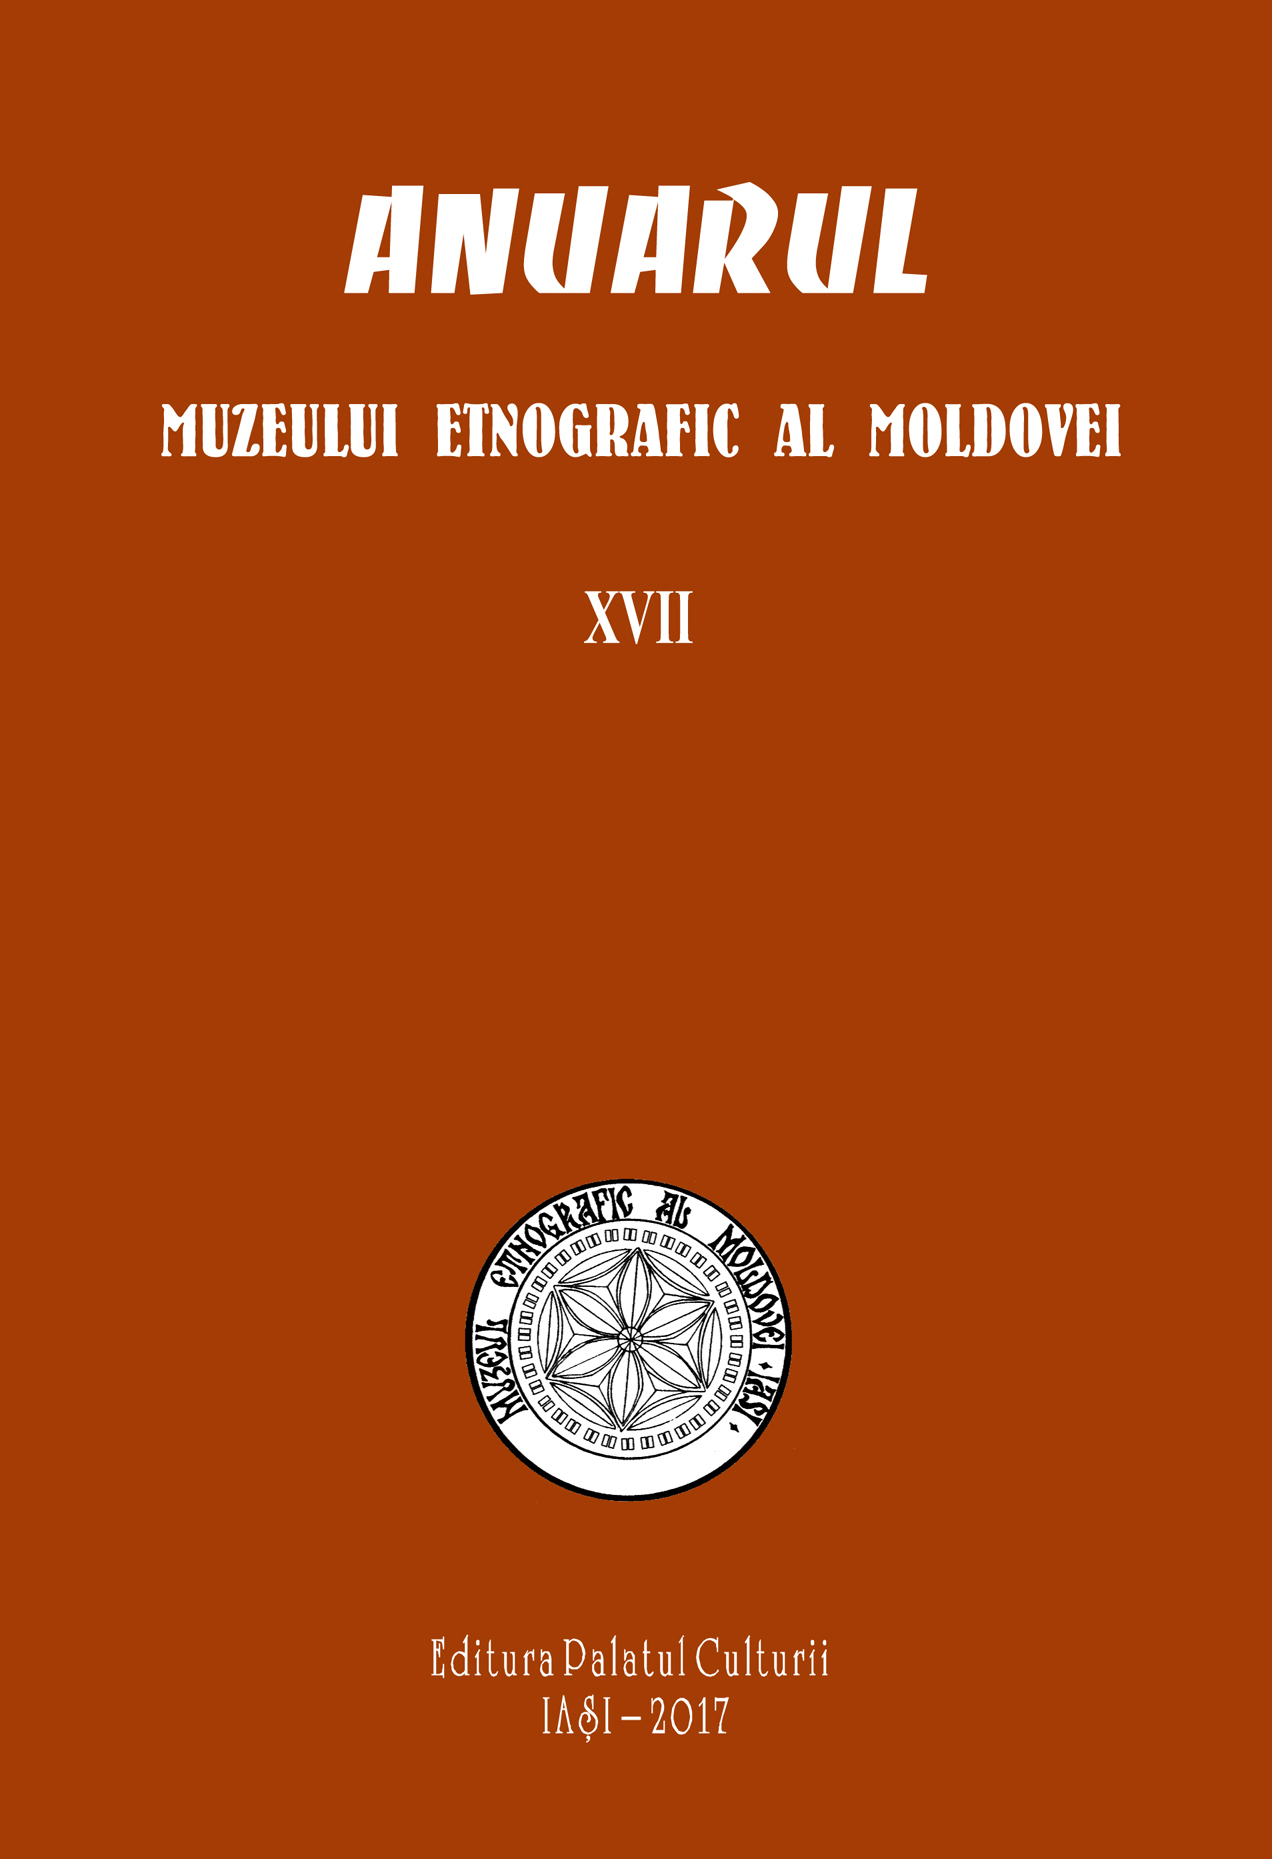 Prosphora Seals in Movileanu-Bobulescu Collection within the Patrimony of the Romanian Peasant’s Museum Cover Image